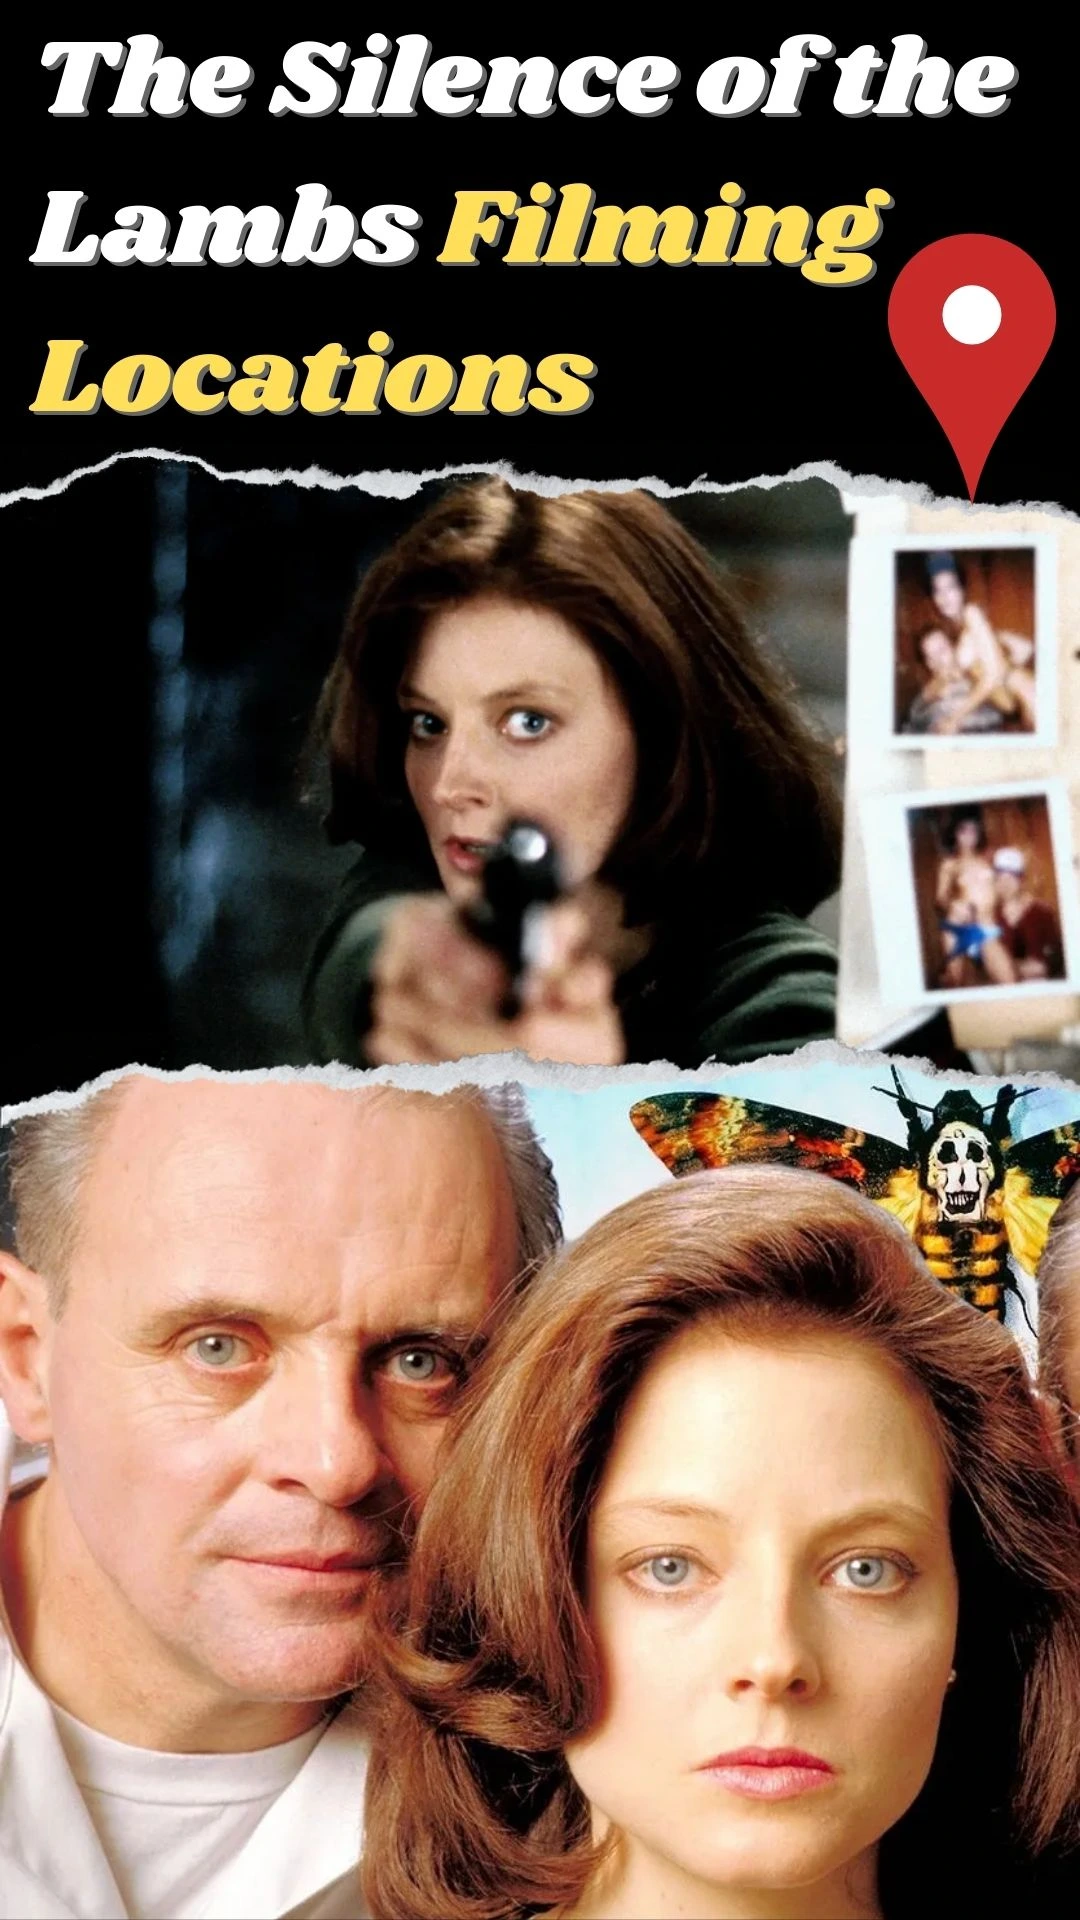 The Silence of the Lambs Filming Locations